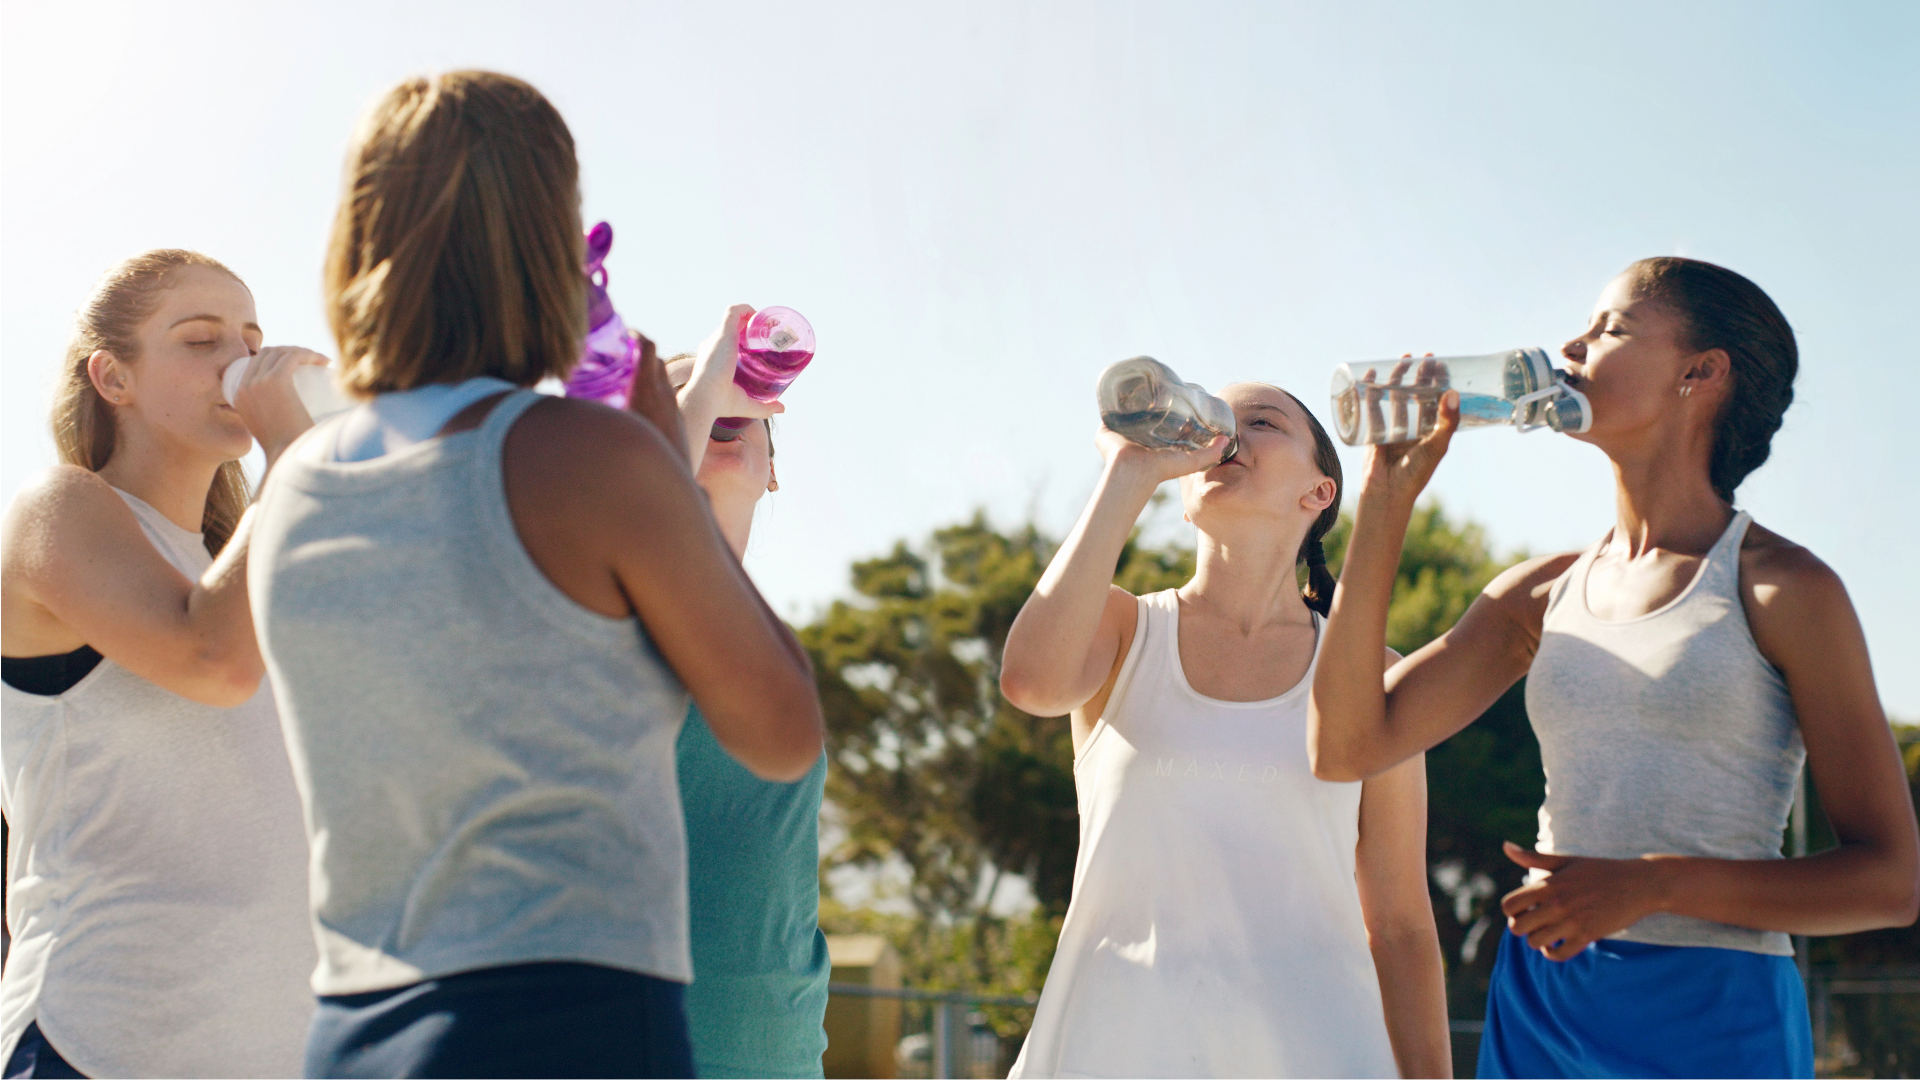 staying hydrated prevents gum disease